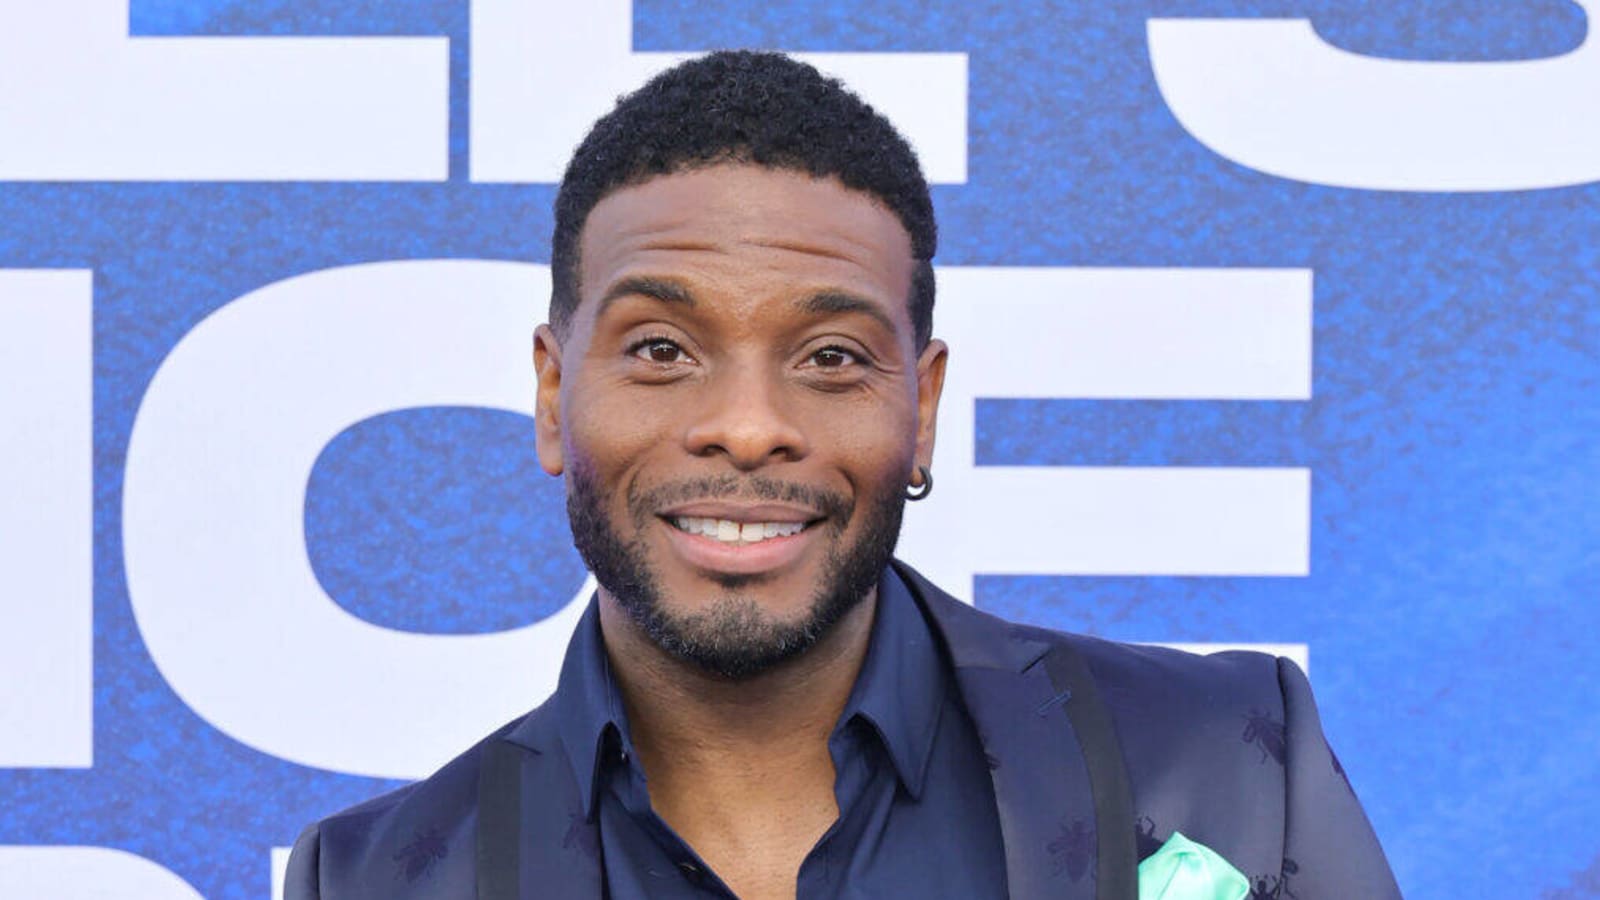 Kel Mitchell Shares Health Update After Medical Emergency: ‘The Scare Was Real’